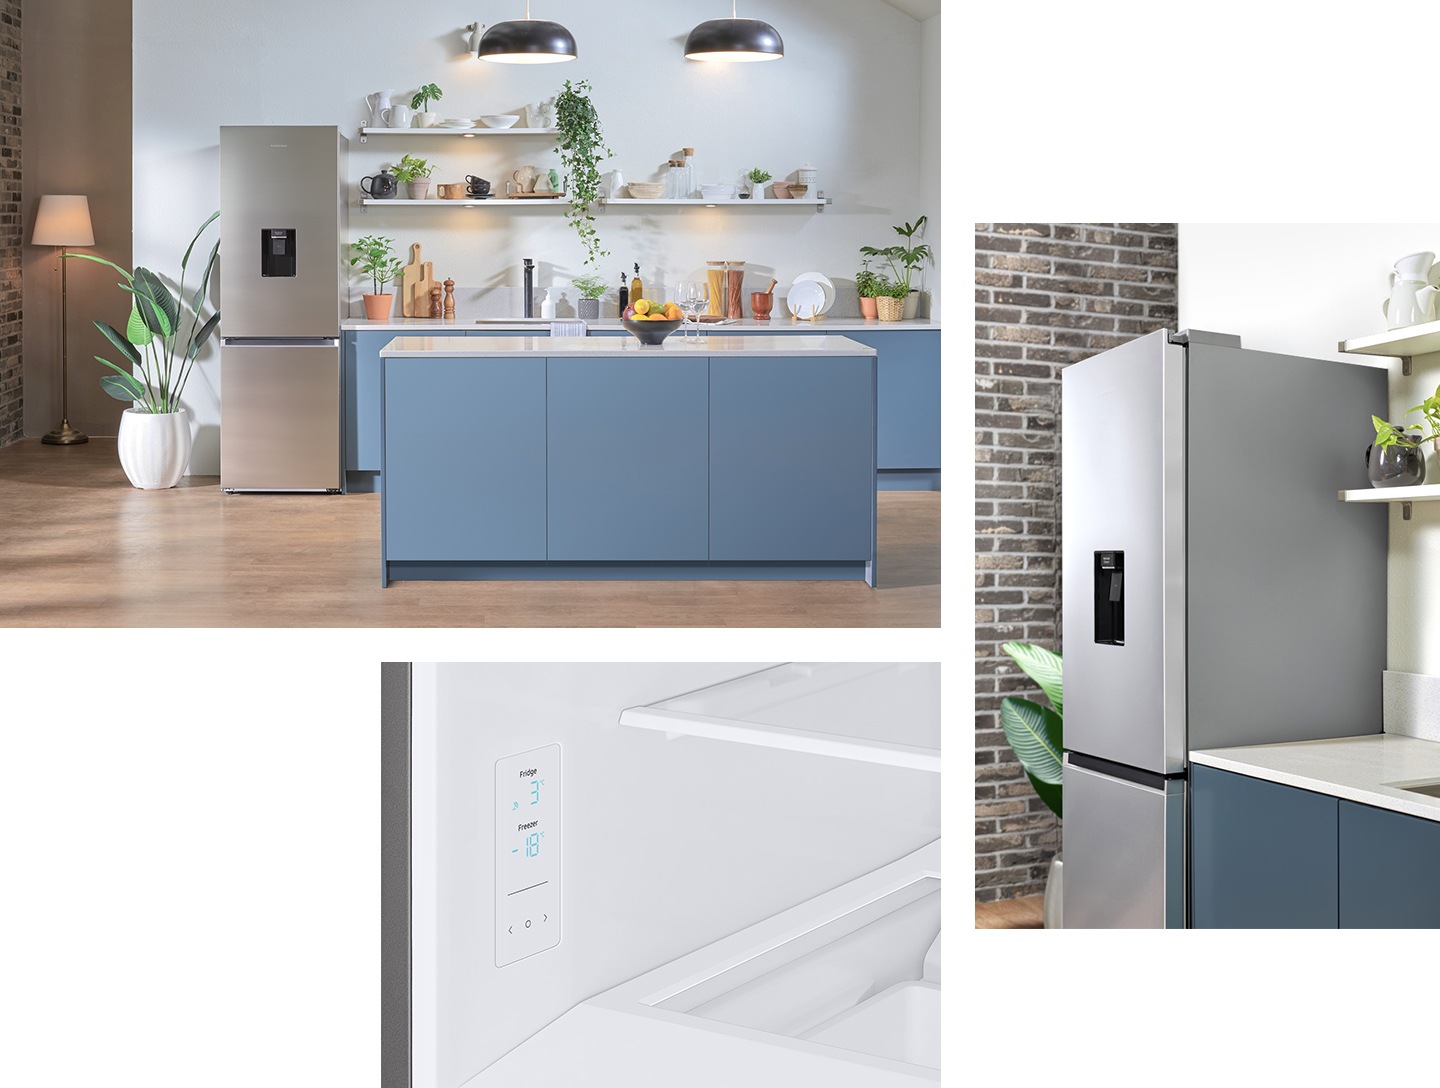 A Samsung fridge RB7300T is standing next to cadet blue sinks and the kitchen looks like minimalist kitchen décor.